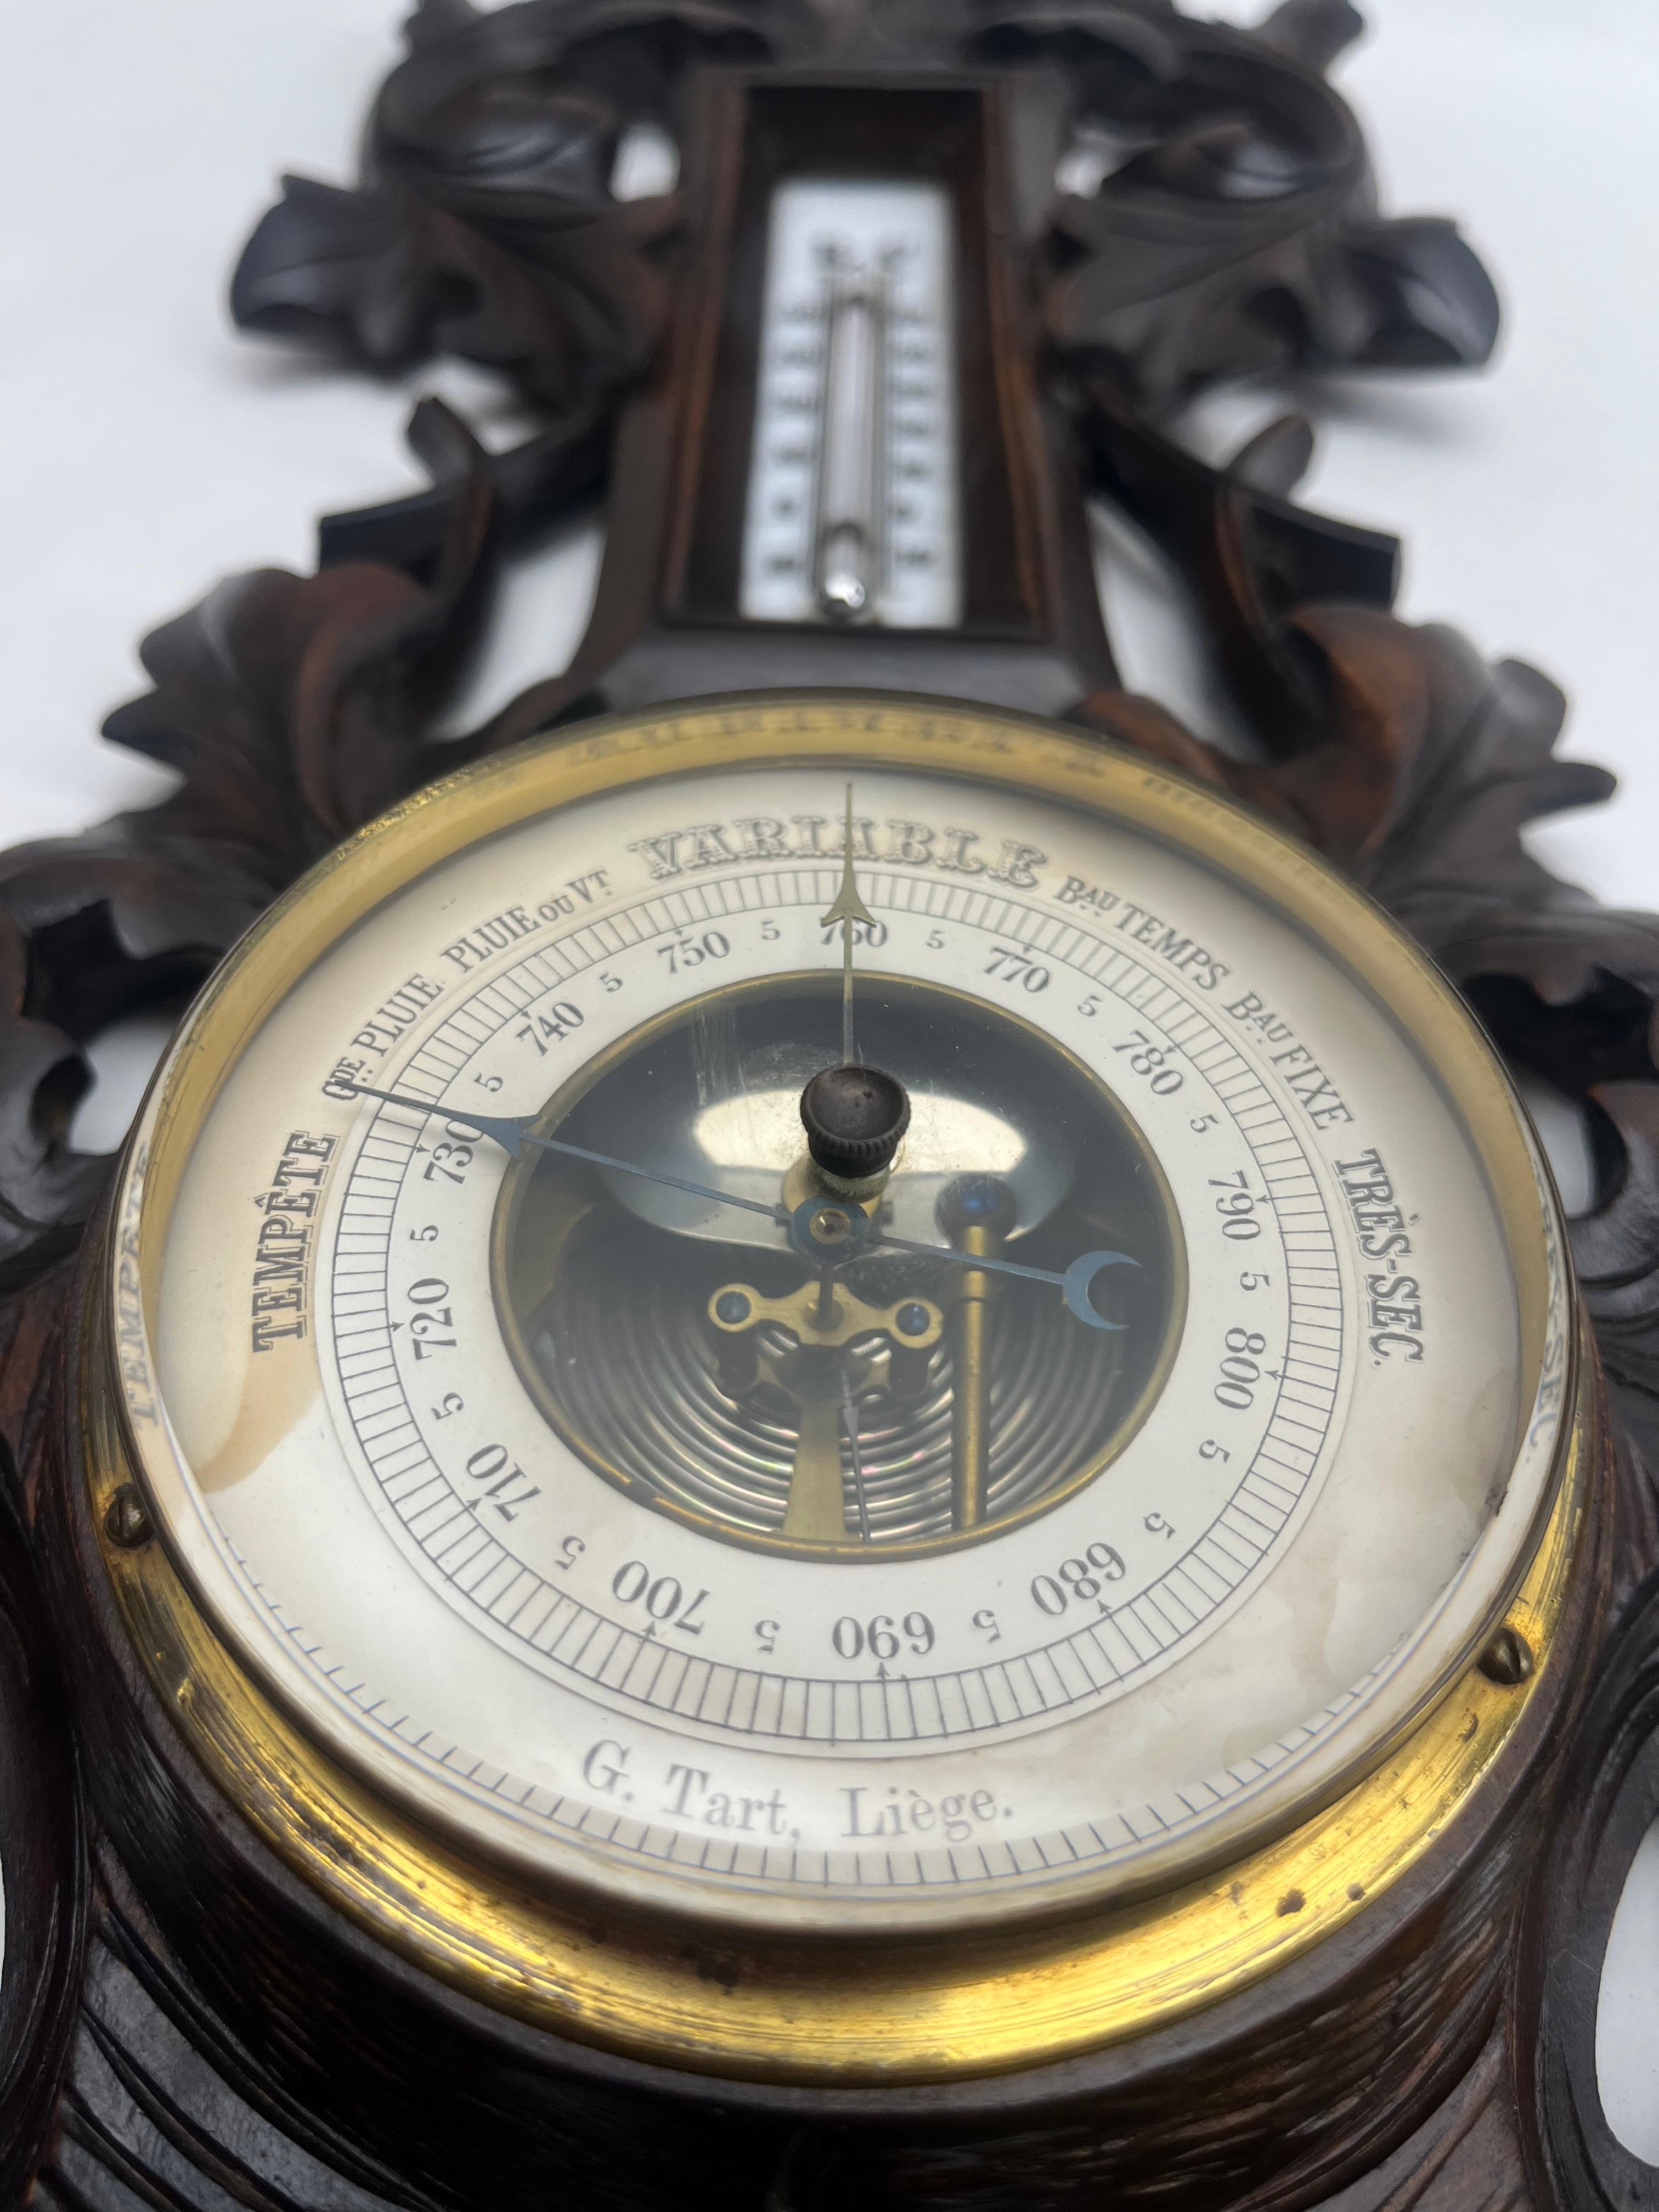 Carved Wooden G.Tart Liege Antique Belgium Barometer with Thermometer, 1910s For Sale 2